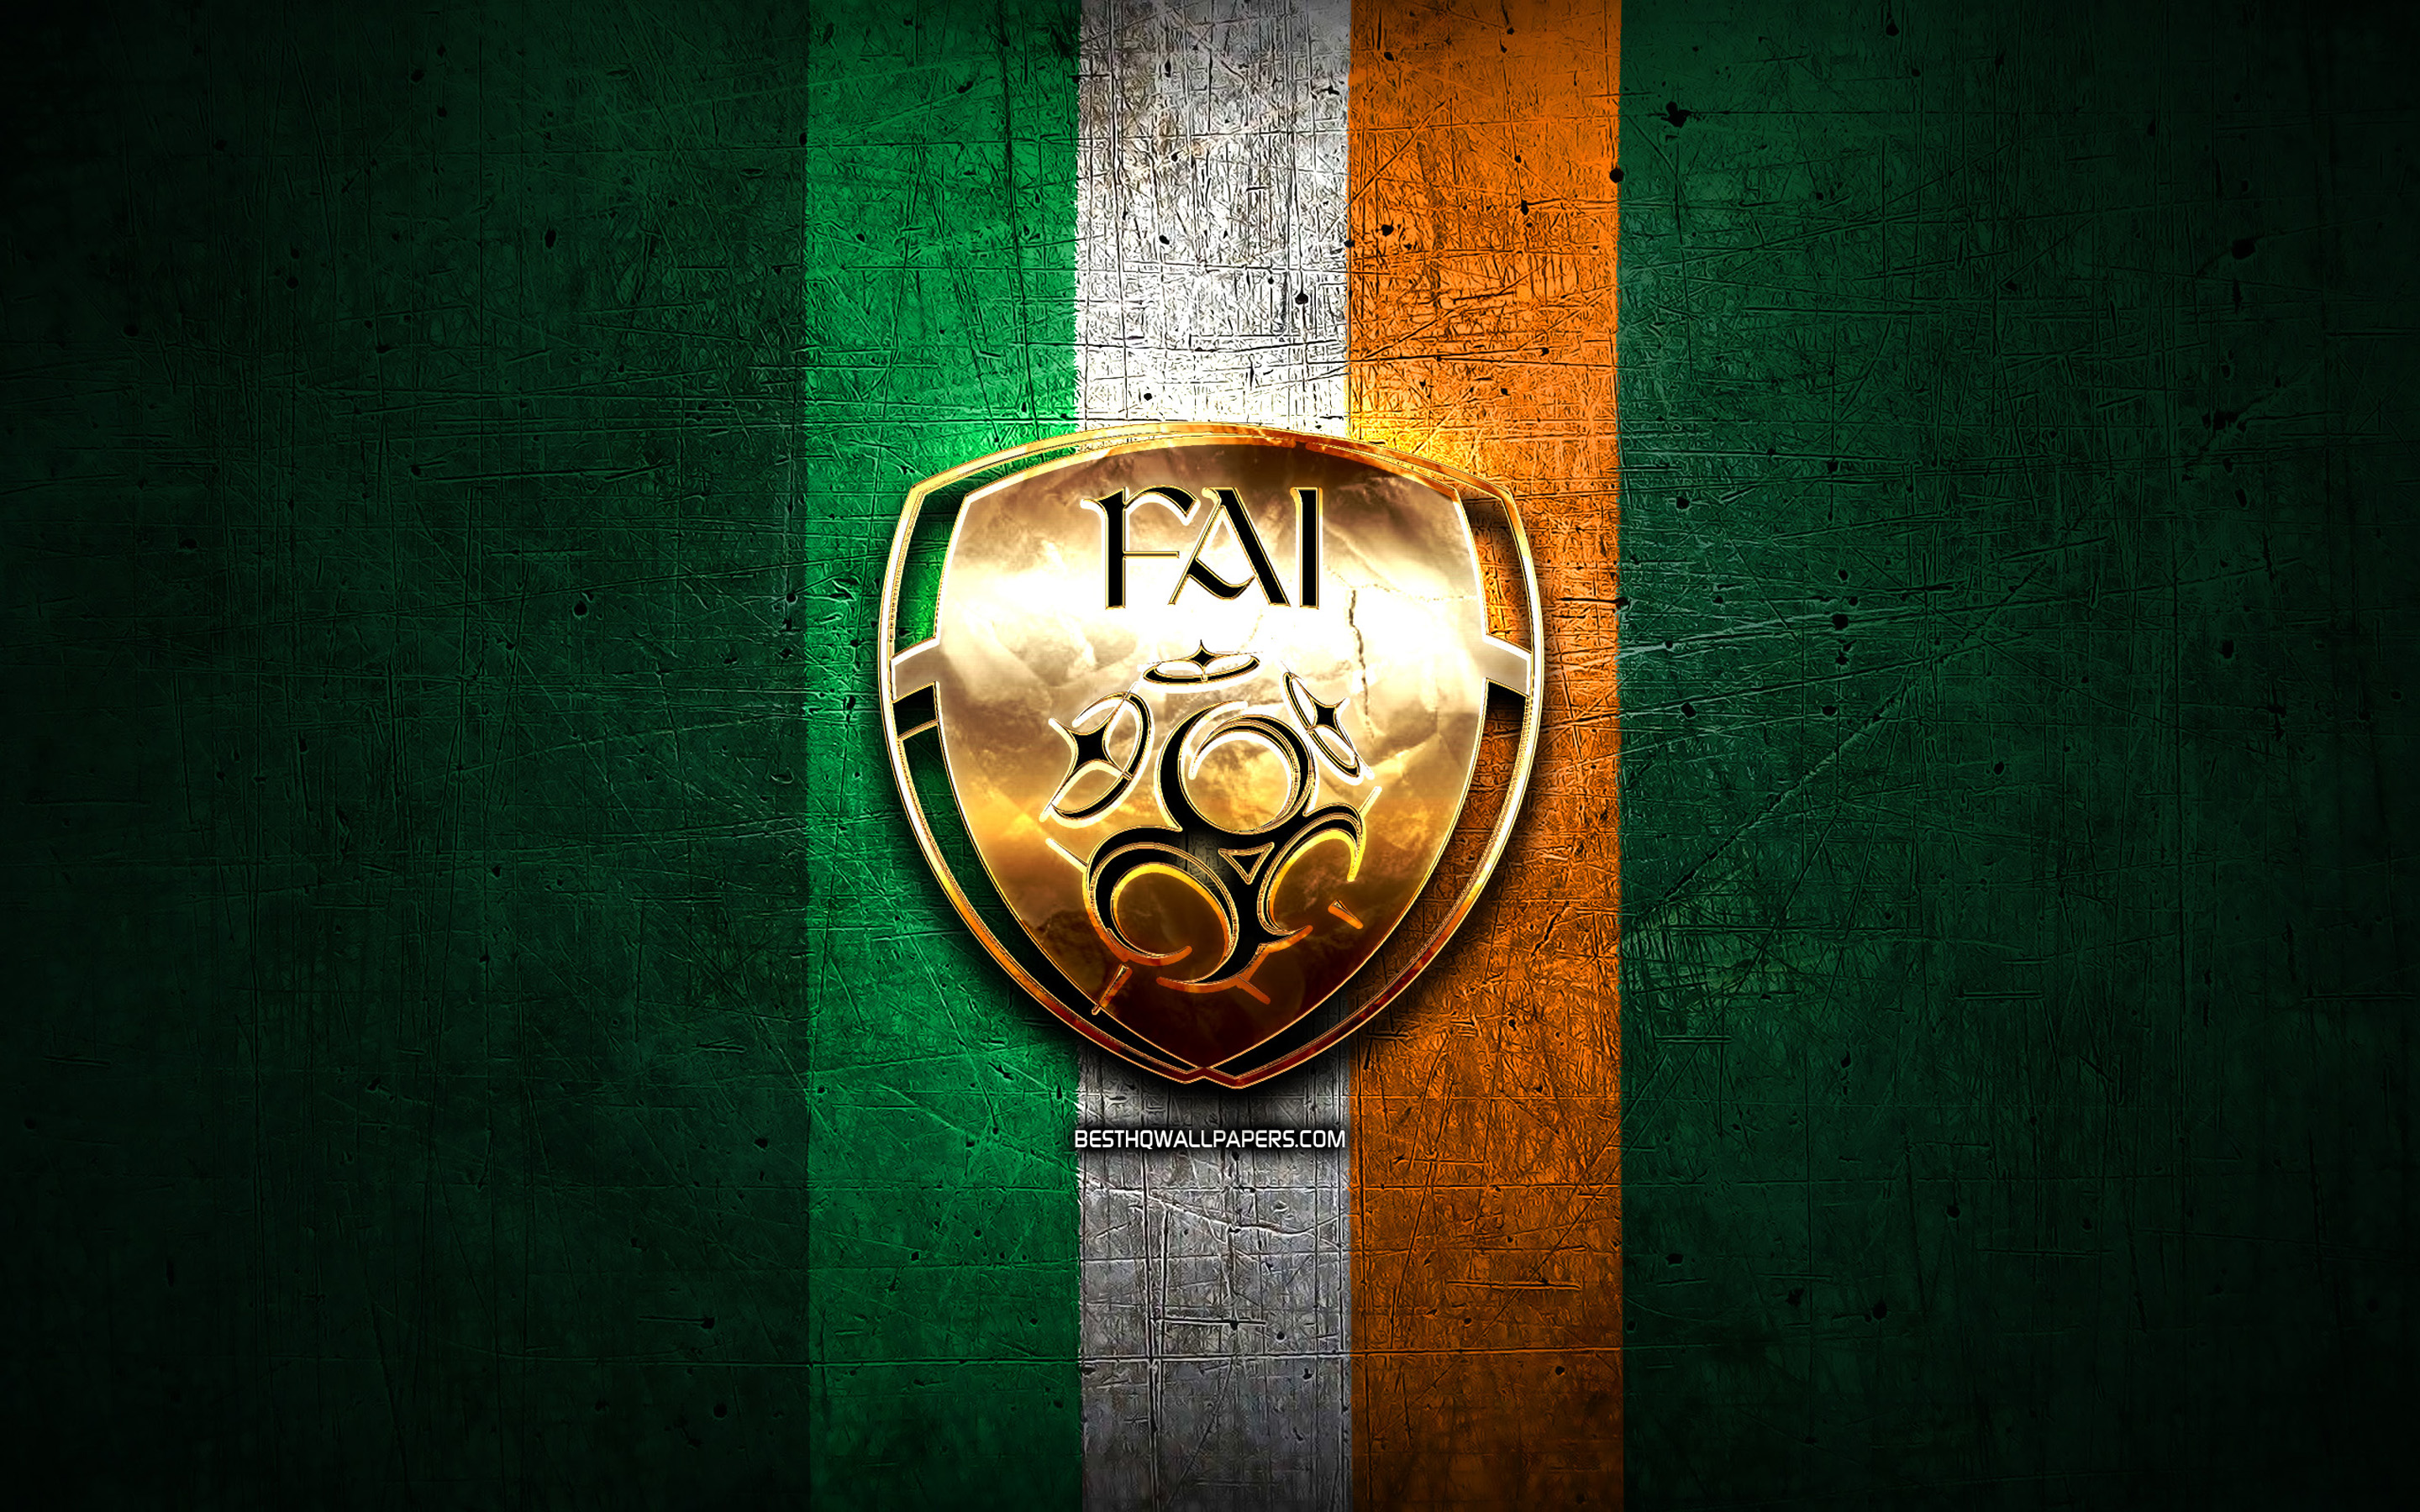 Download wallpaper Ireland National Football Team, golden logo, Europe, UEFA, green metal background, Irish football team, soccer, FAI logo, football, Ireland for desktop with resolution 2880x1800. High Quality HD picture wallpaper